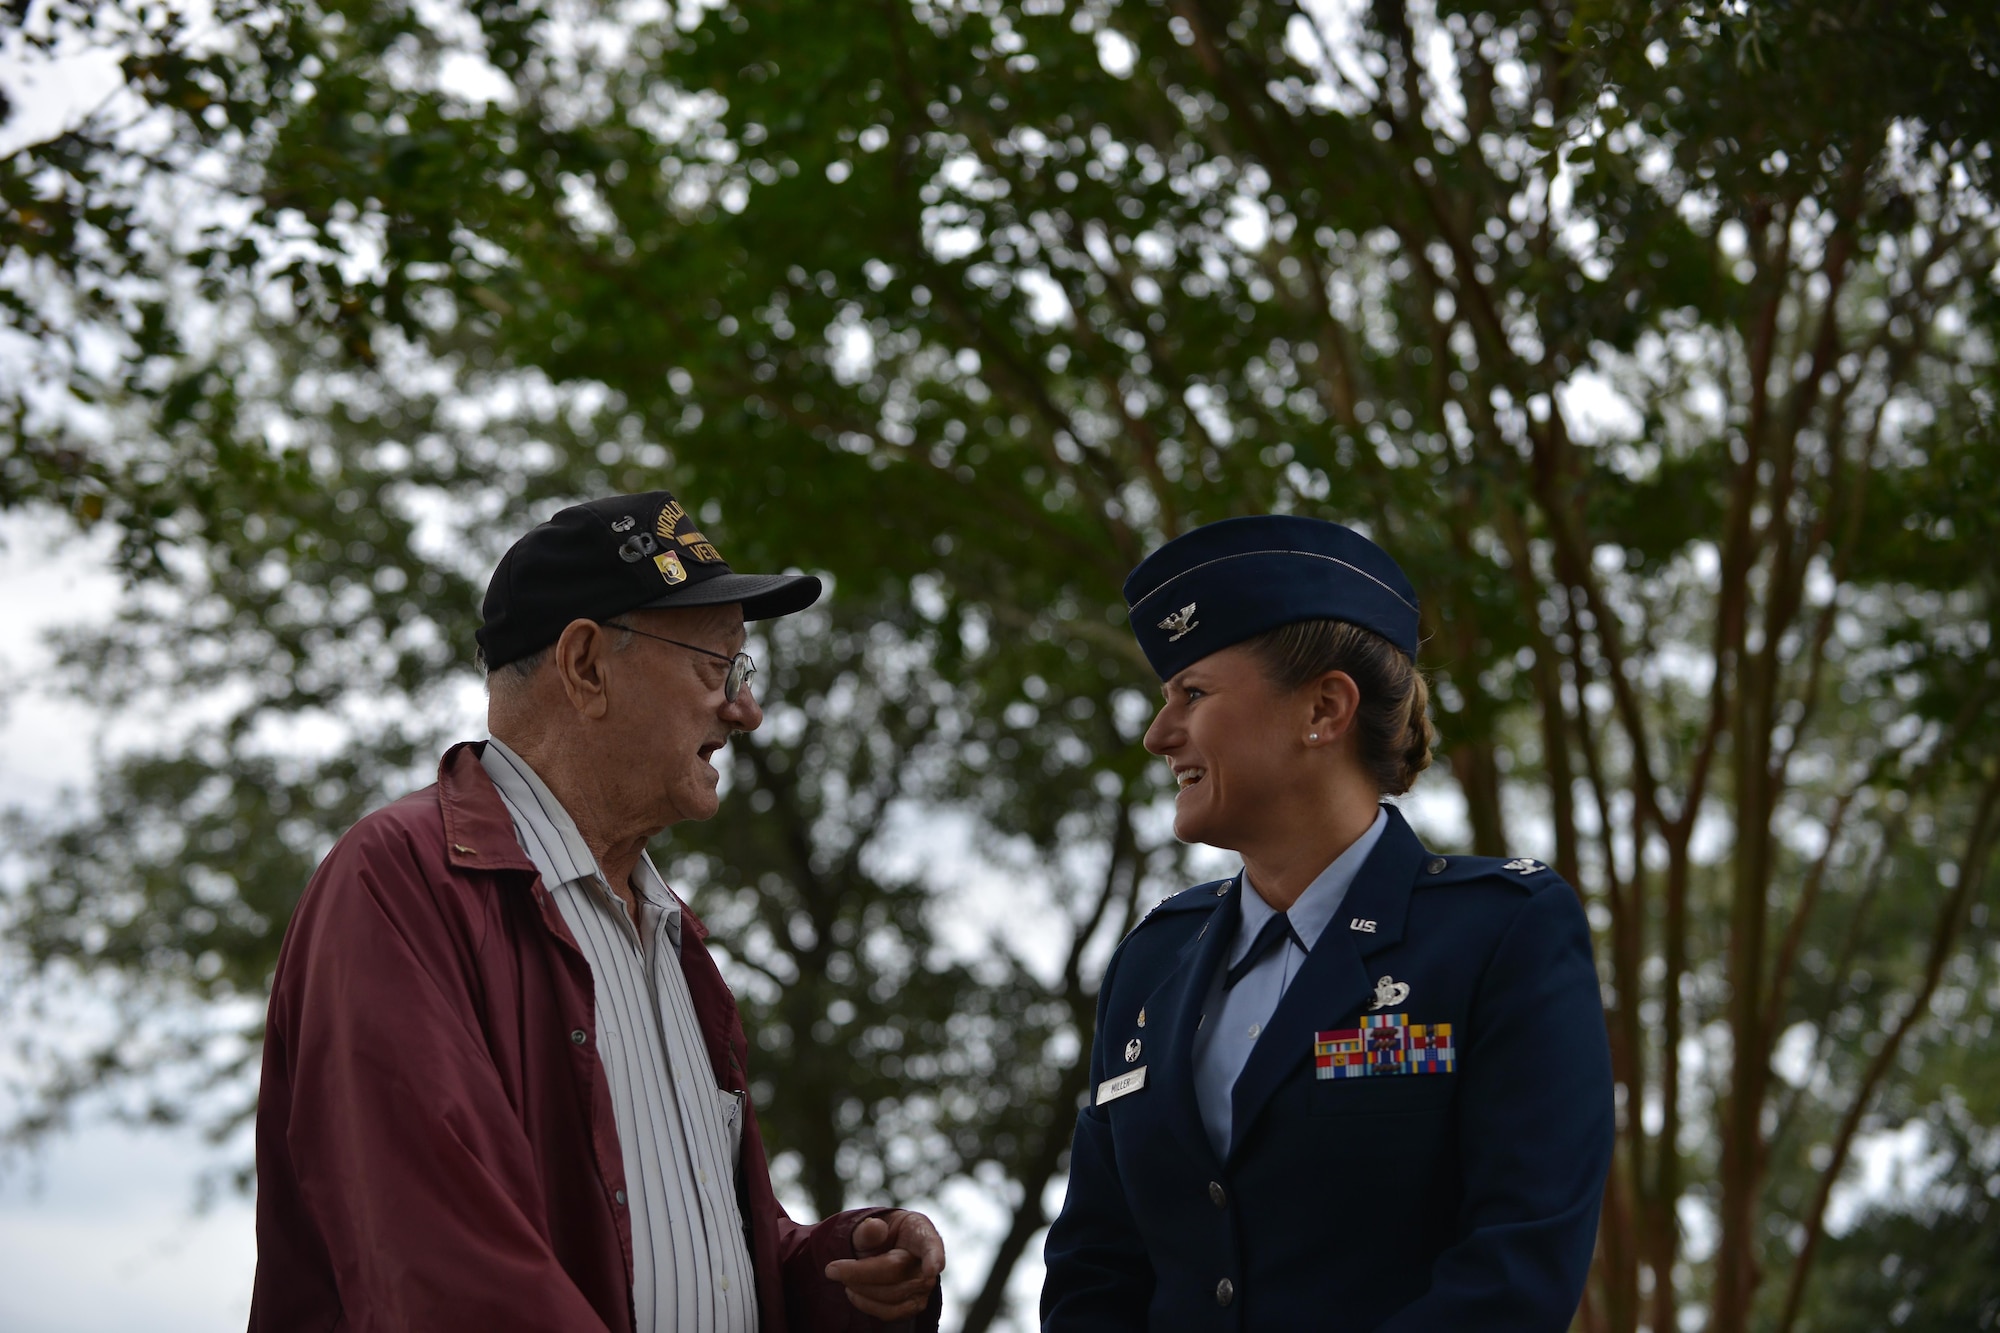 U.S. Air Force Col. Caroline M. Miller, 633rd Air Base Wing commander, speaks with Allen Ordorff, a World War II veteran, before the POW/MIA Recognition Day ceremony at Joint Base Langley-Eustis, Va., Sept. 16, 2016. While serving in the European theater during World War II, Orndorff was a member of the unit that found and liberated the Nazi concentration camp Dachau. (U.S. Air Force photo by Staff Sgt. Natasha Stannard)